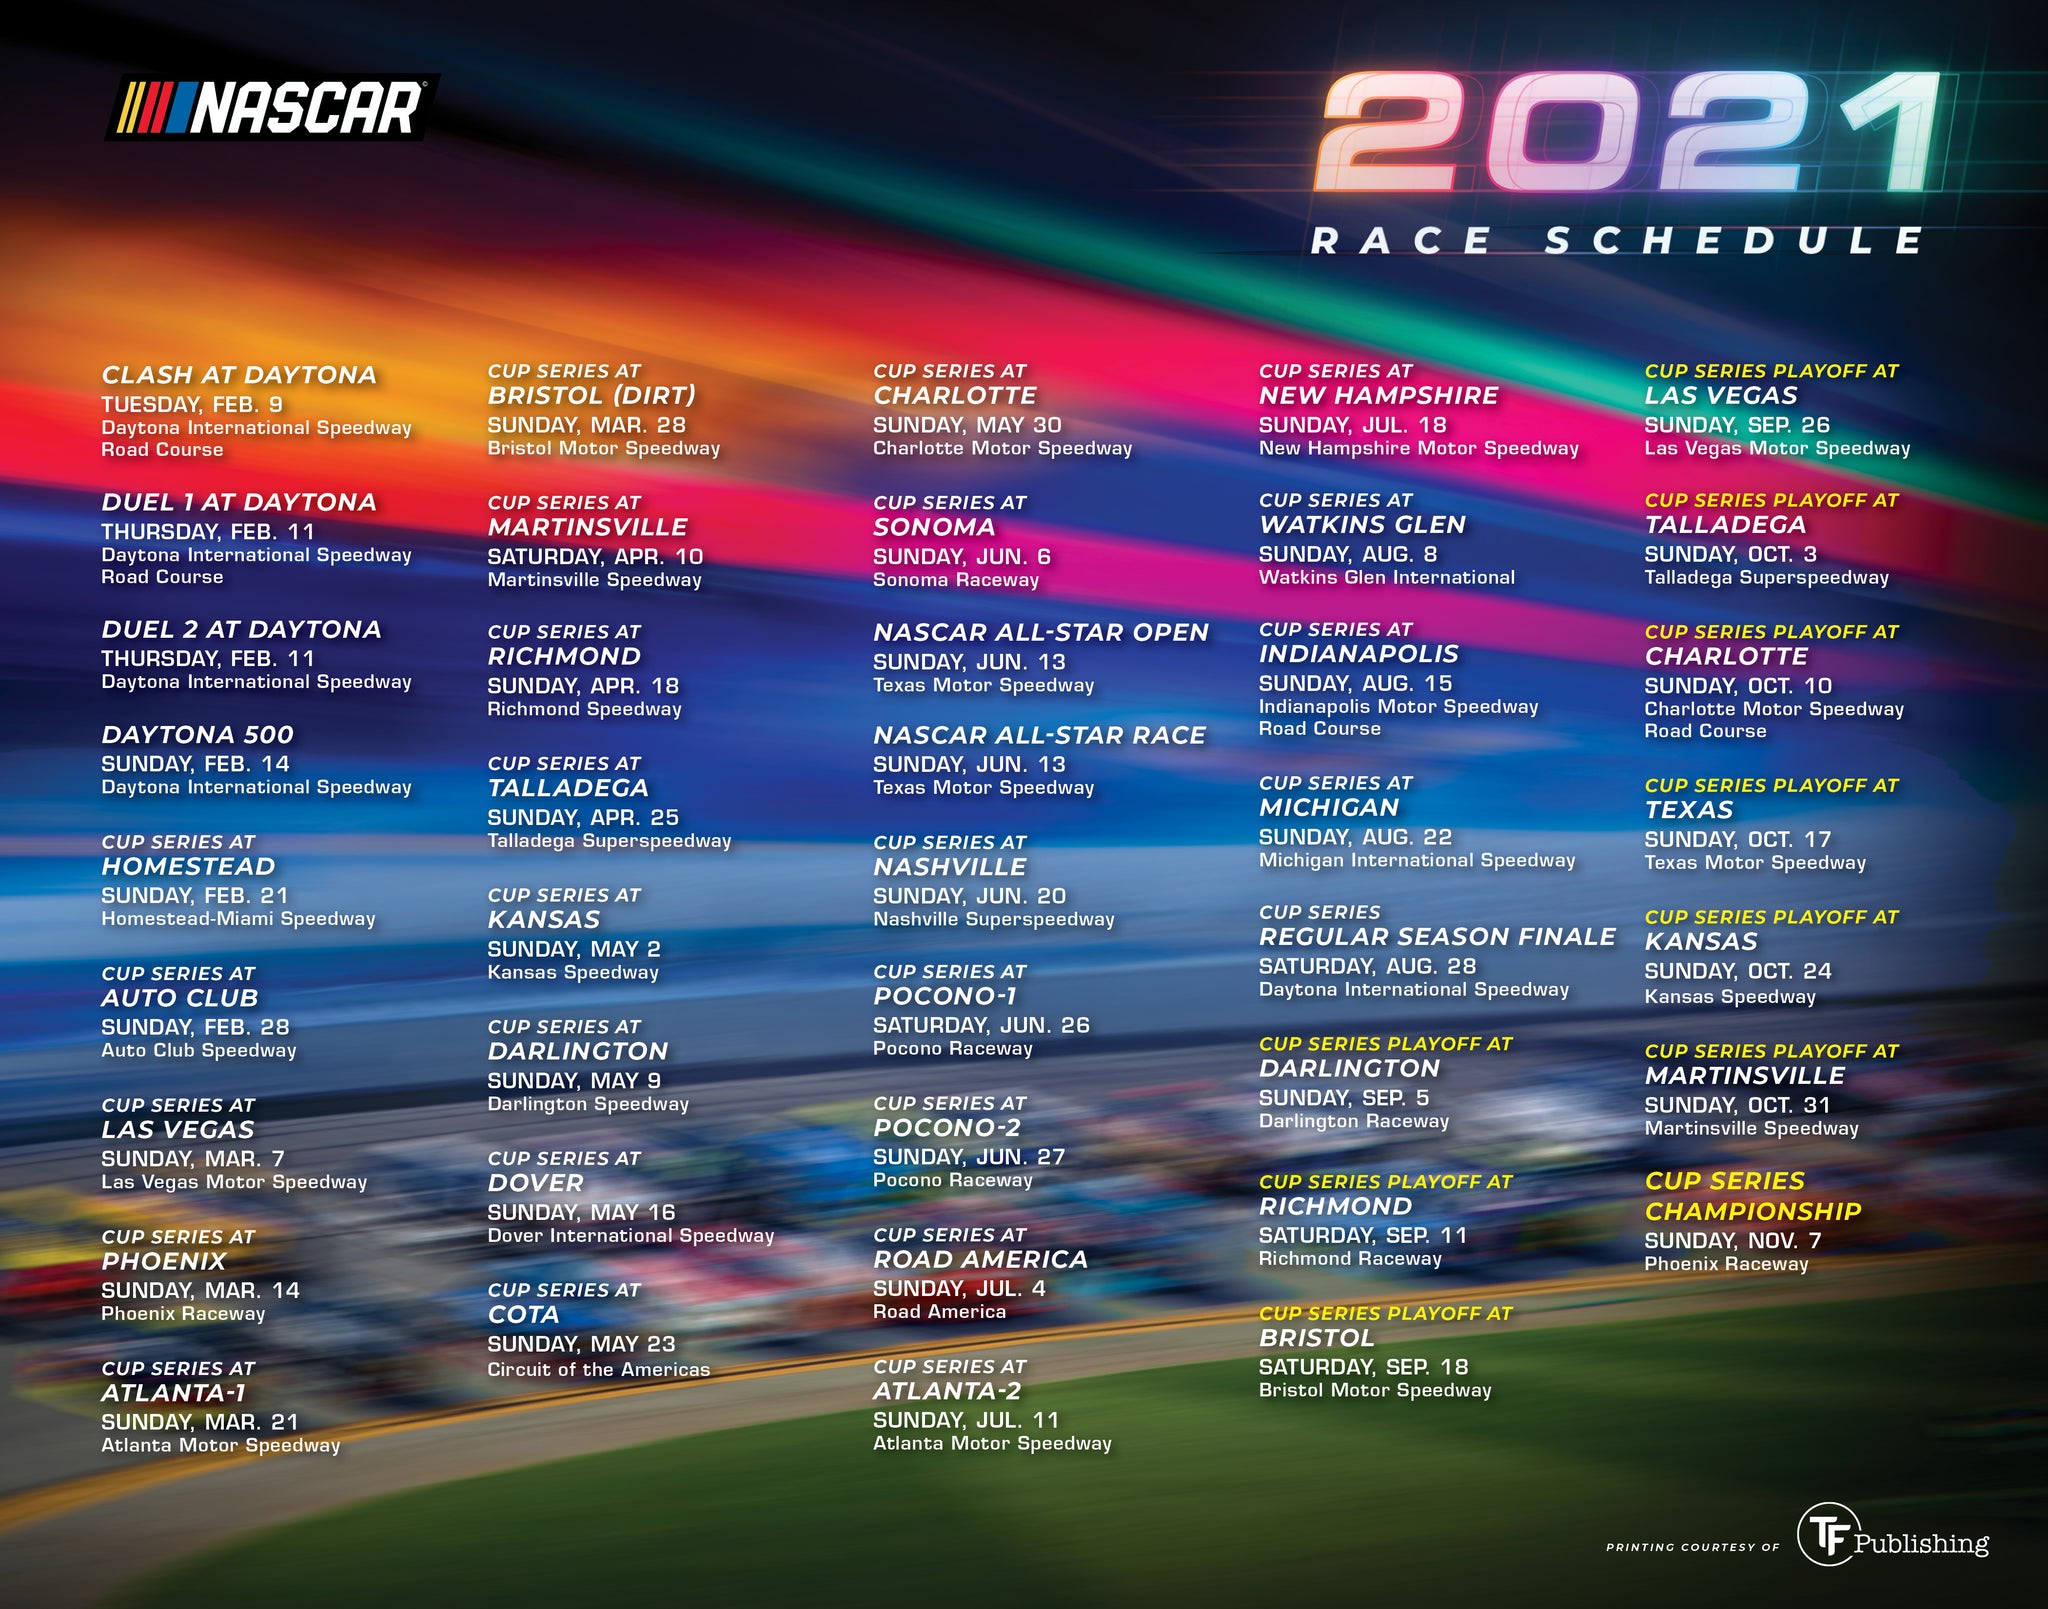 Nascar Schedule 2021 - What I Would Like The 2021 Nascar Schedule To Be